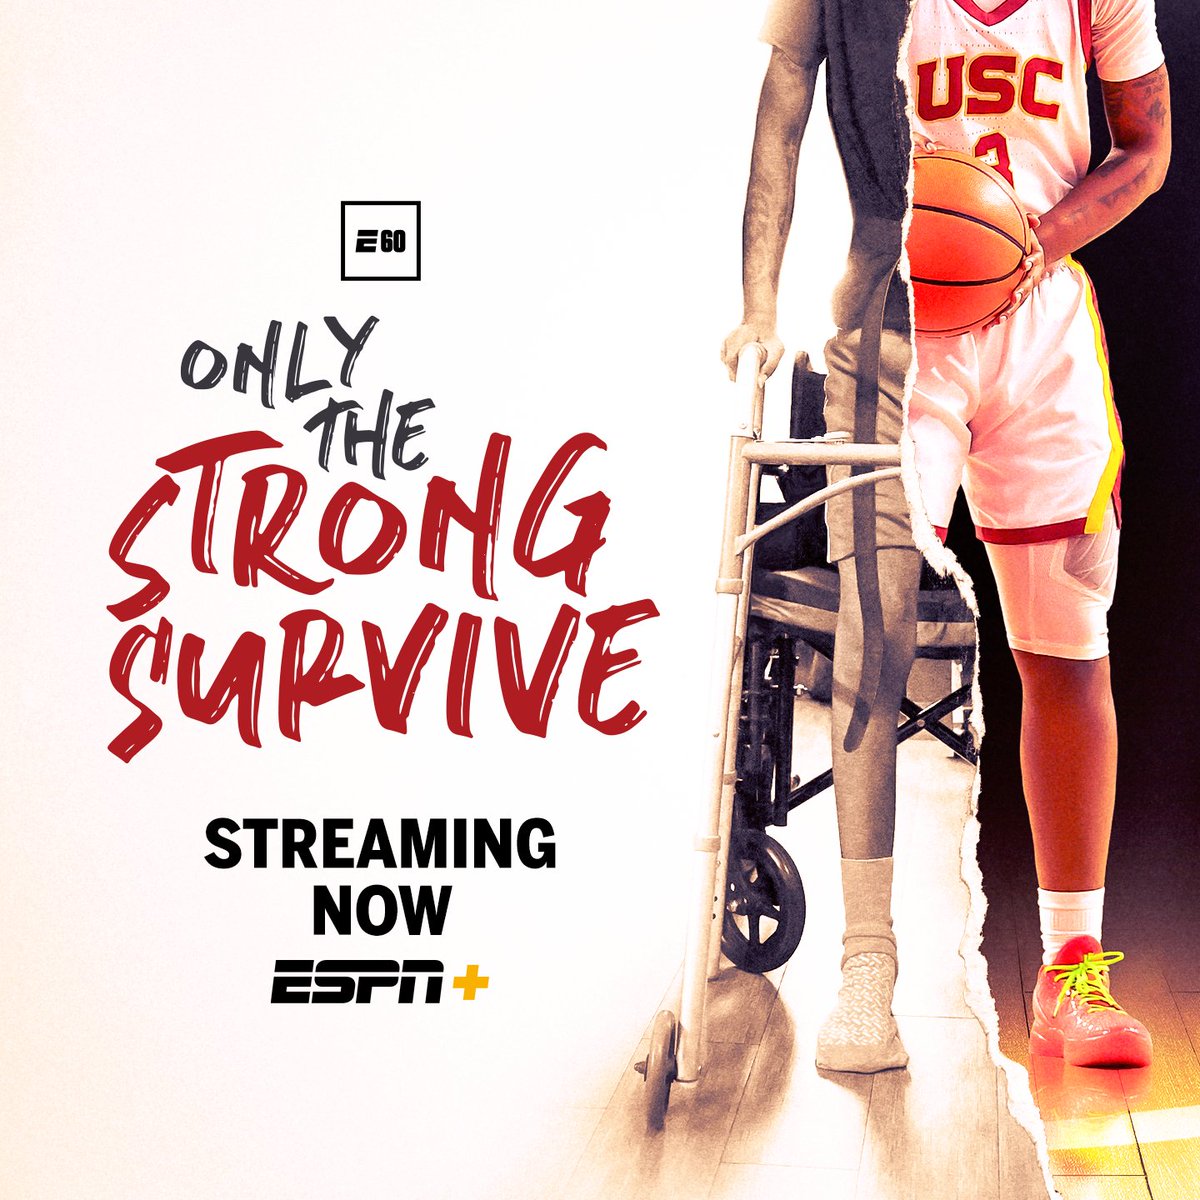 Missed the premiere? No problem. 'Only the Strong Survive' is available to stream now on ESPN+.